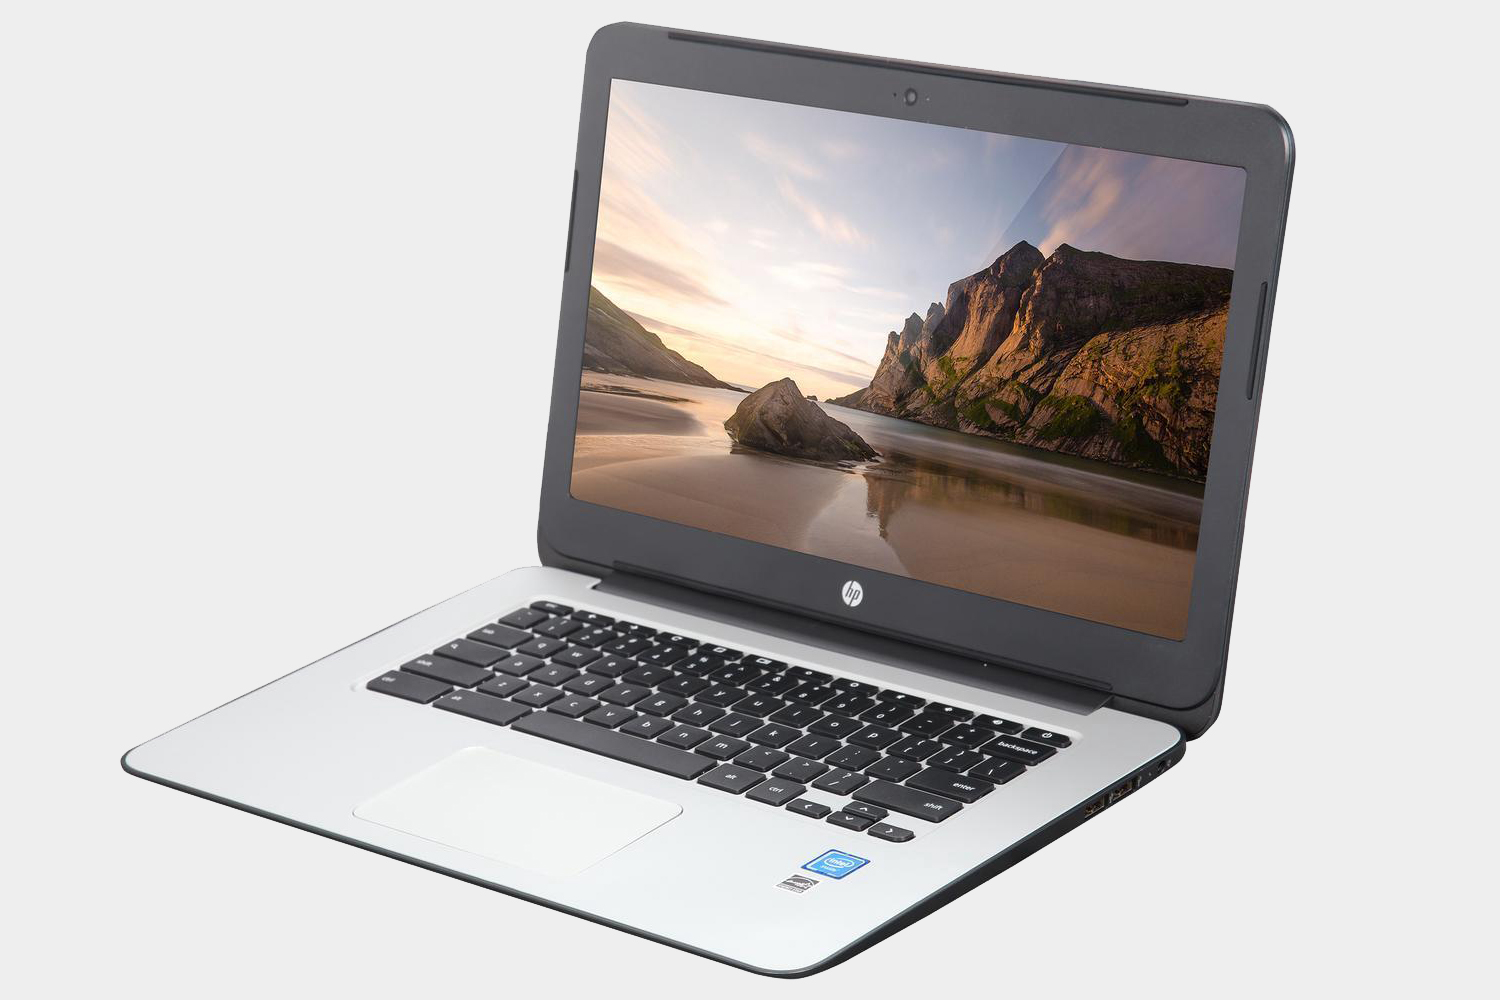 Get this ultra portable HP Chromebook for just $300